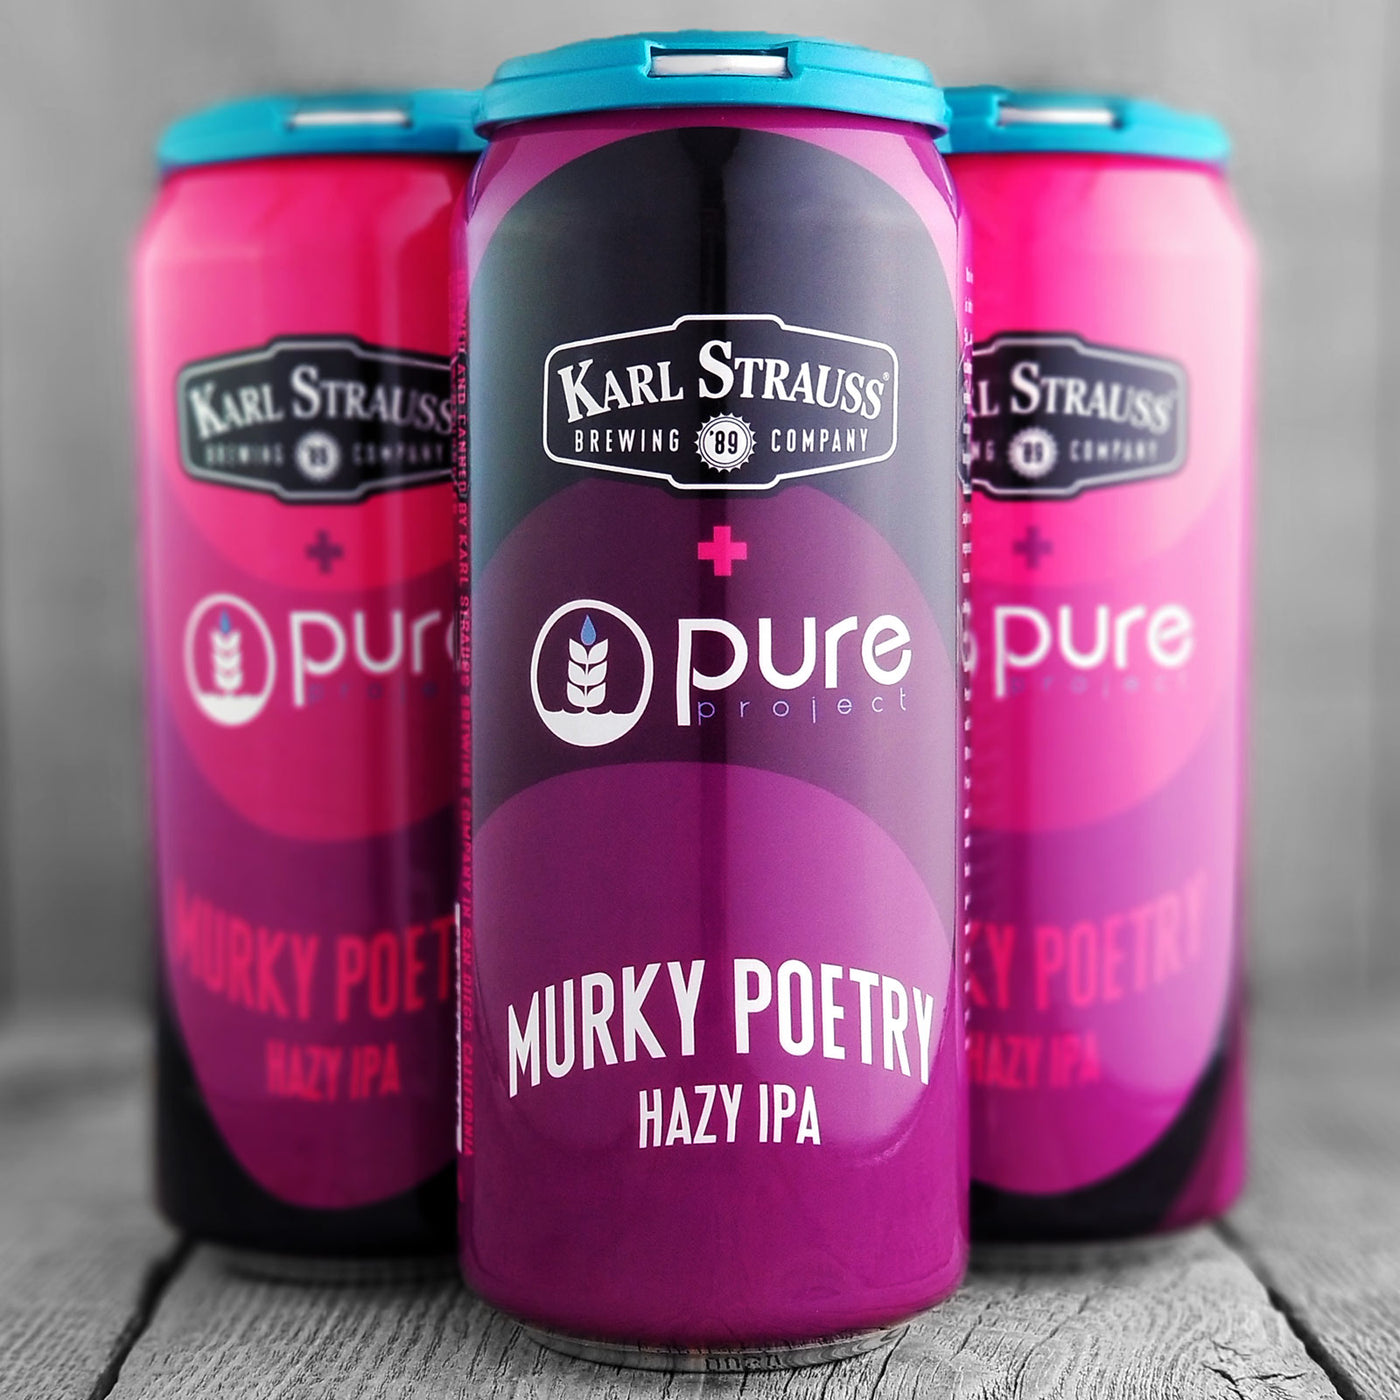 Karl Strauss / Pure Project - Murky Poetry